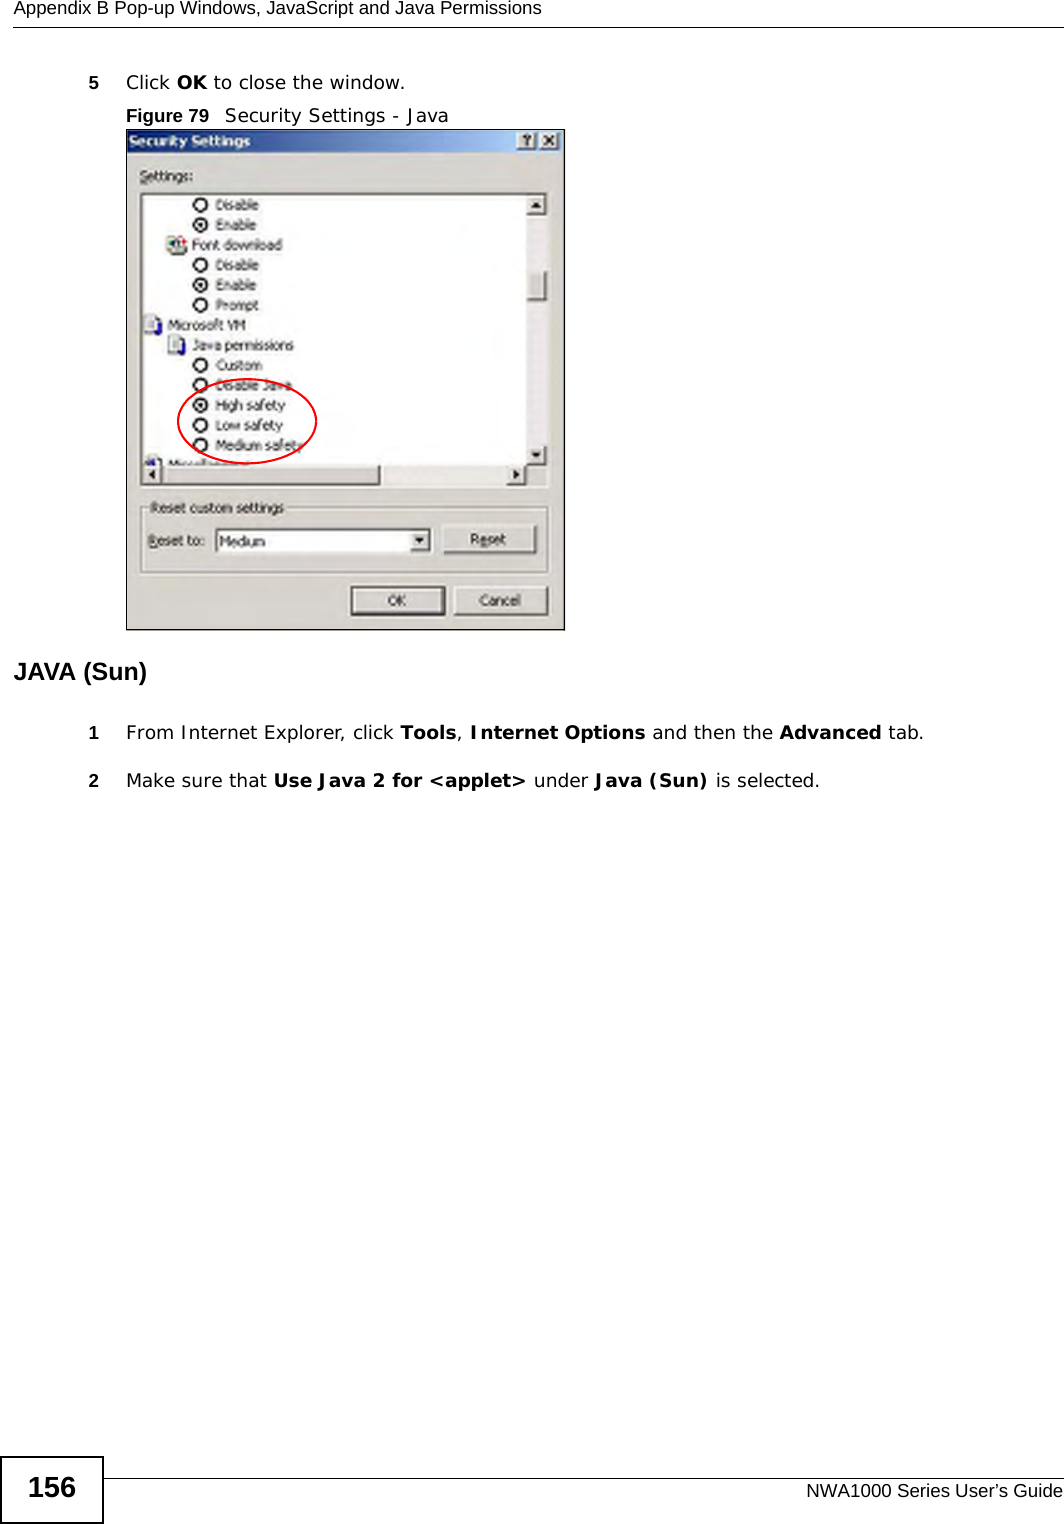 Appendix B Pop-up Windows, JavaScript and Java PermissionsNWA1000 Series User’s Guide1565Click OK to close the window.Figure 79   Security Settings - Java JAVA (Sun)1From Internet Explorer, click Tools, Internet Options and then the Advanced tab. 2Make sure that Use Java 2 for &lt;applet&gt; under Java (Sun) is selected.